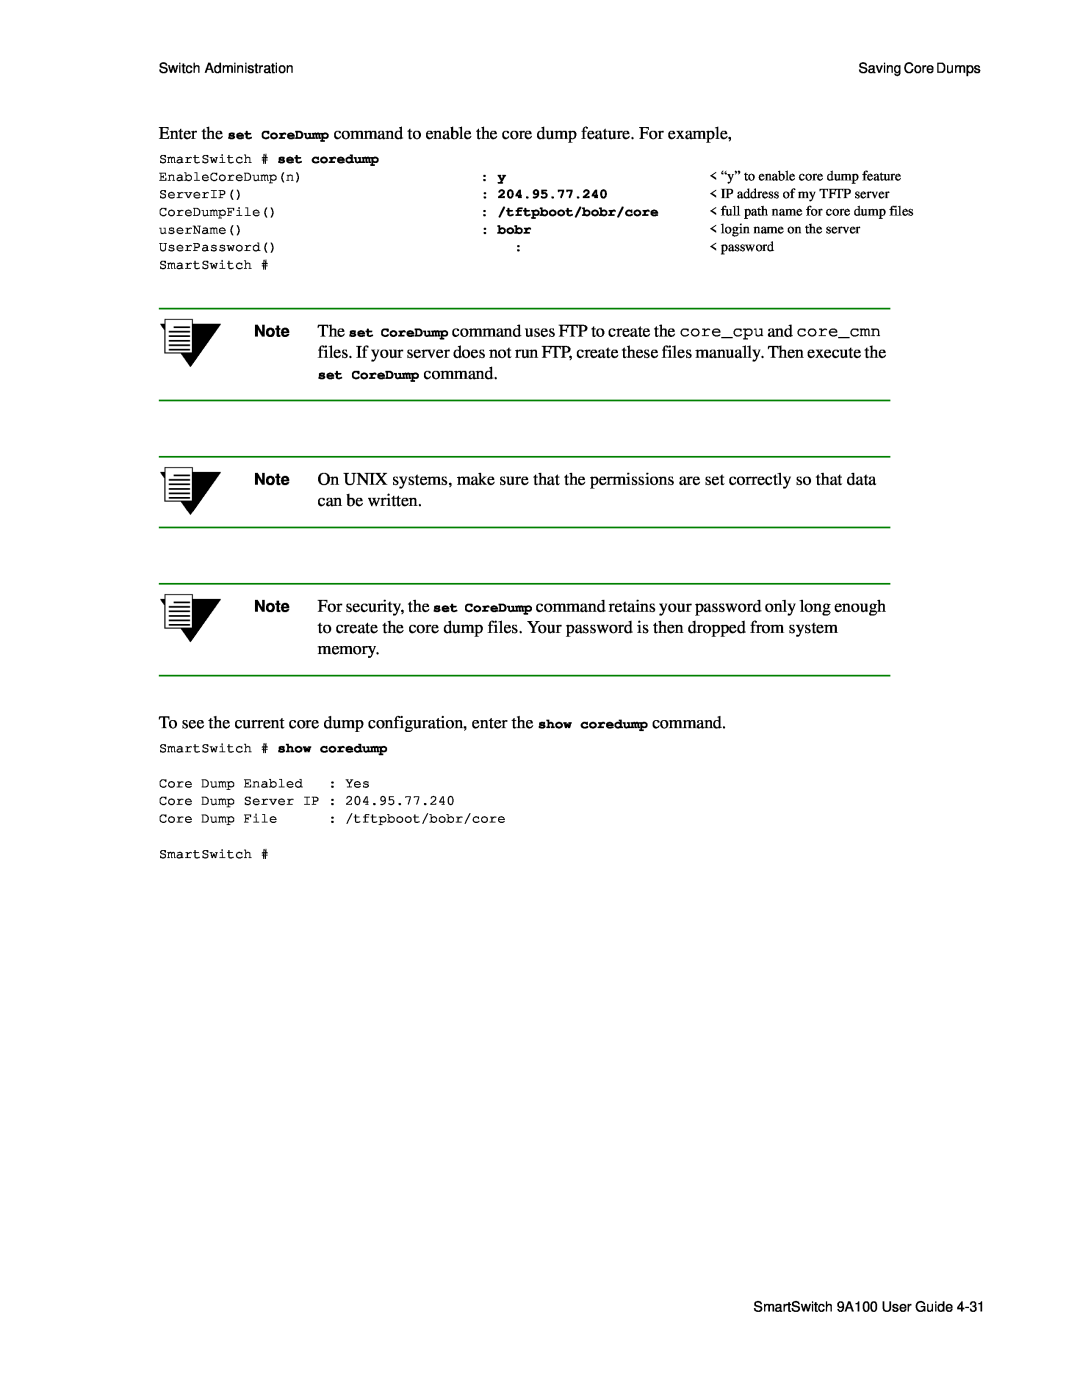 Cabletron Systems 9A100 manual 204.95.77.240, IP address of my TFTP server, tftpboot/bobr/core, login name on the server 